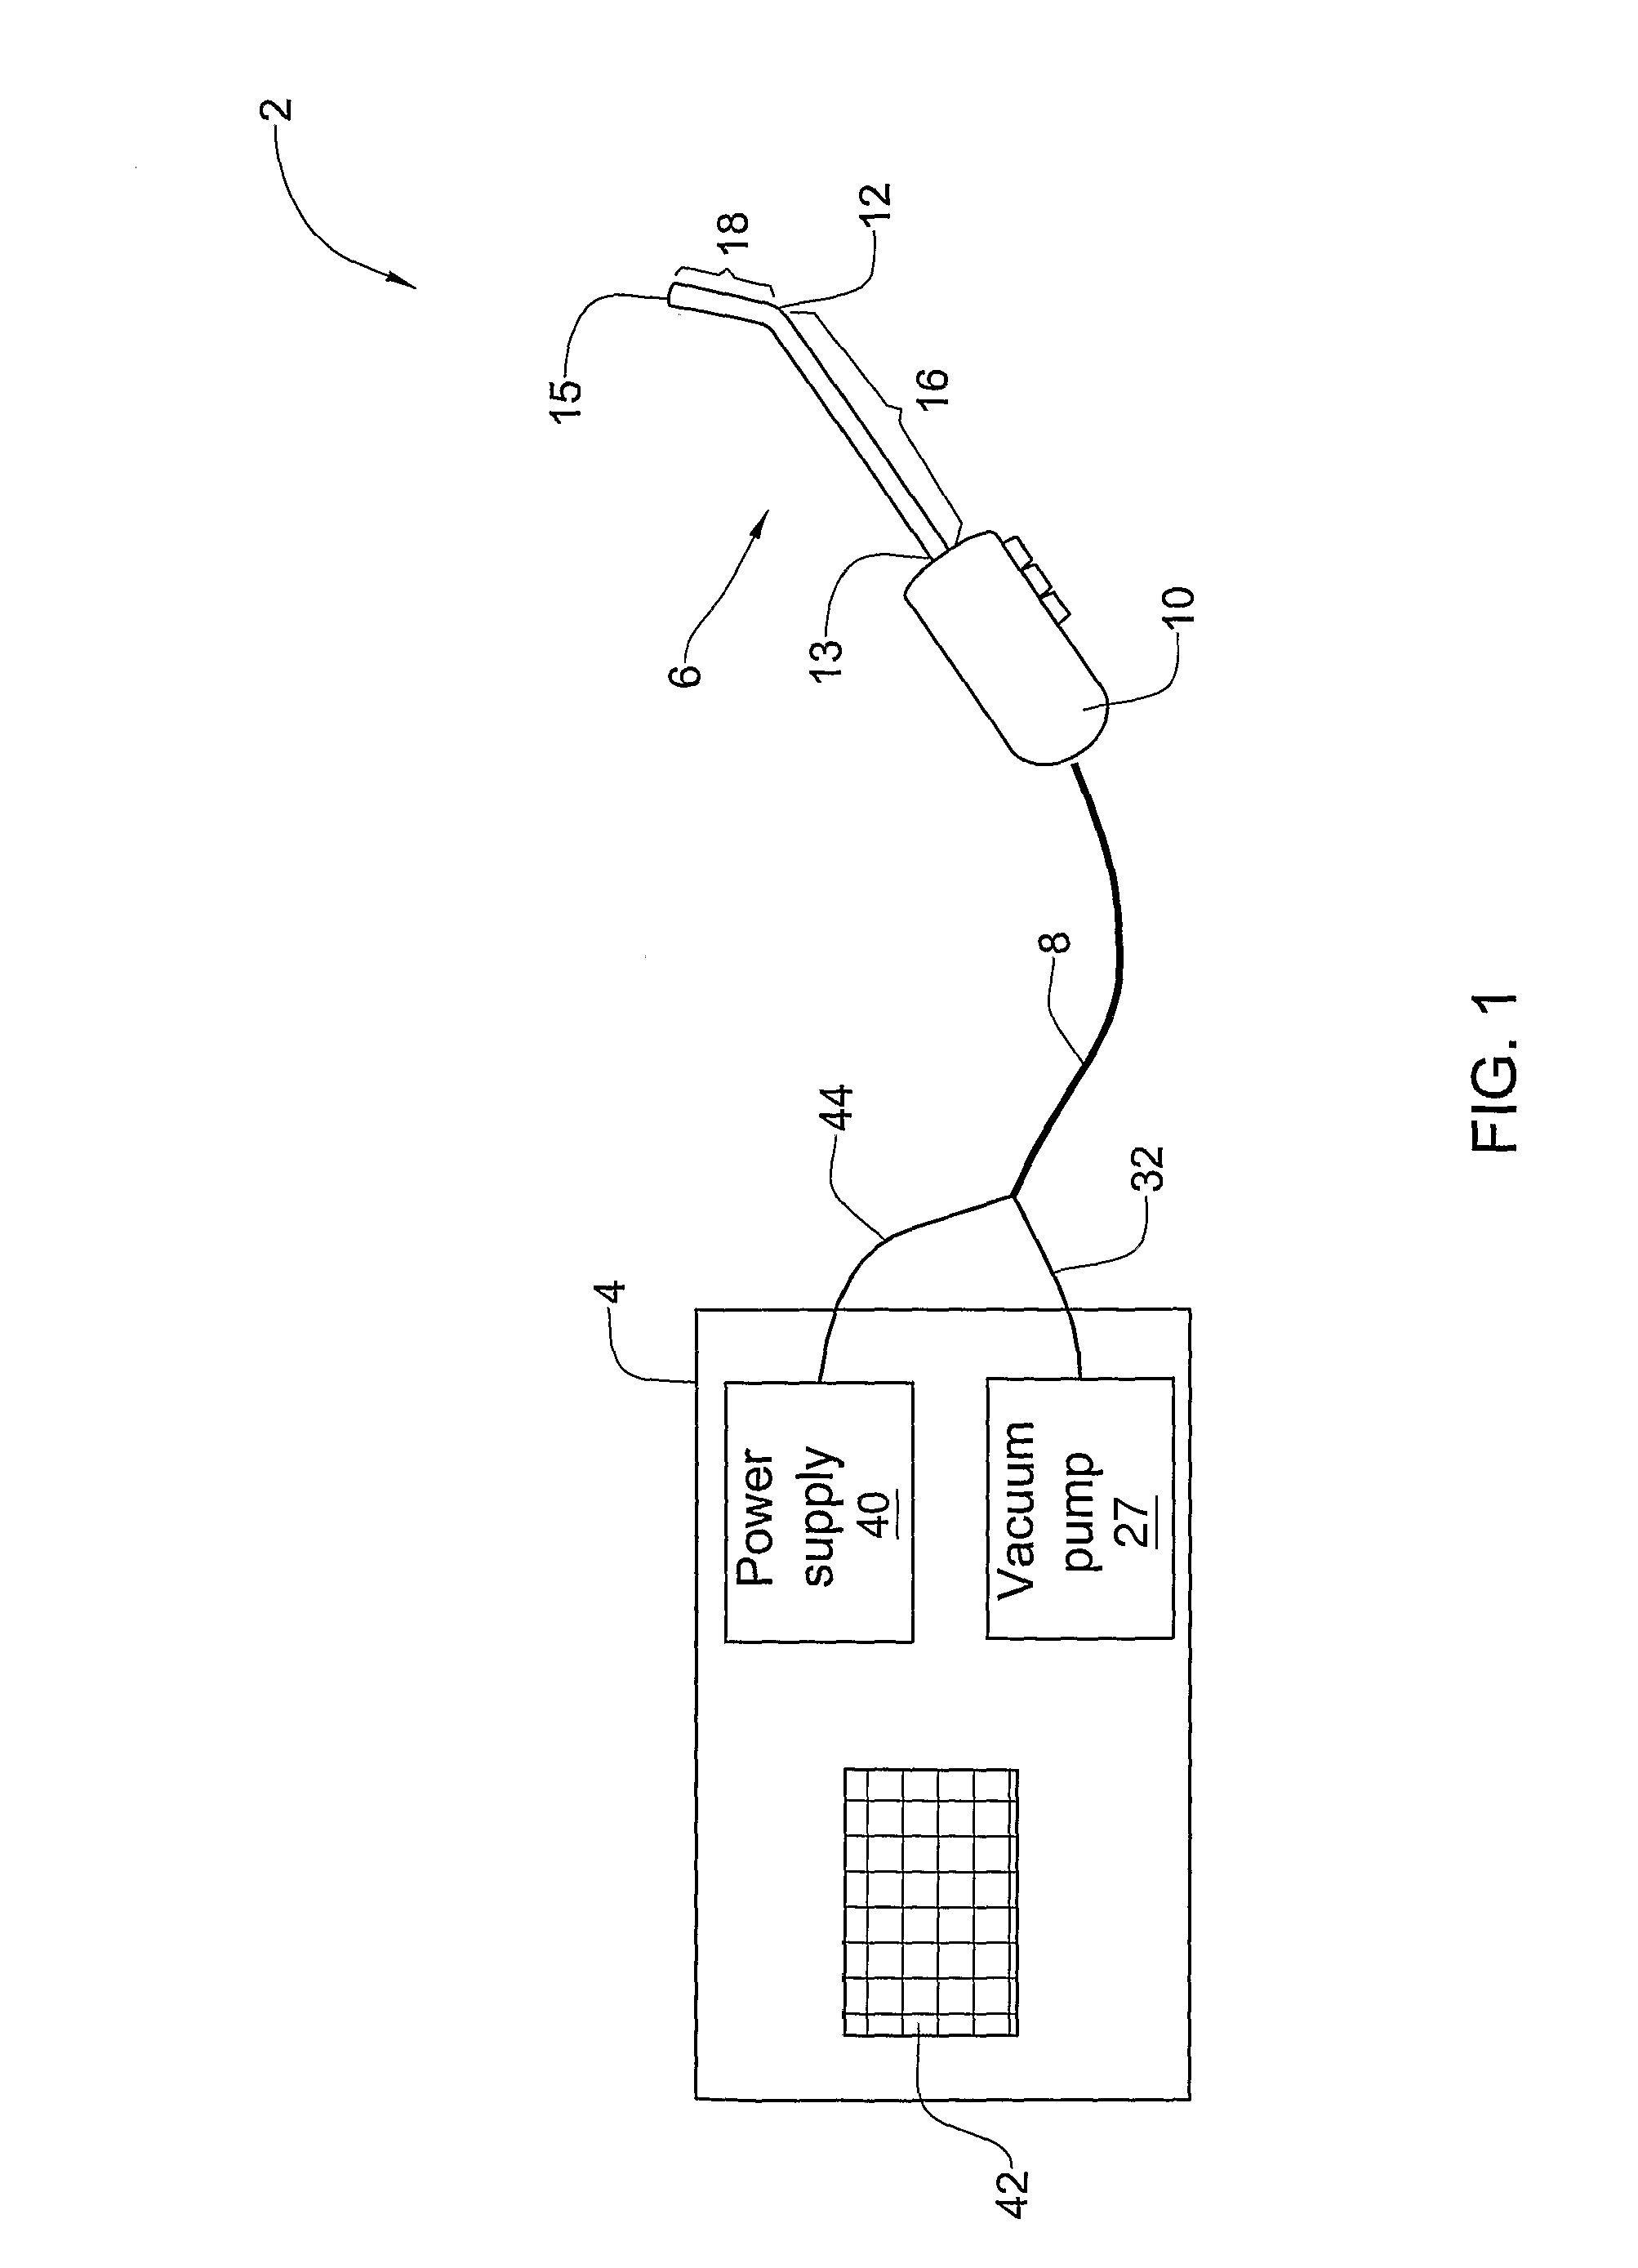 System and method for transfetal (amnion-chorion) membranes transport